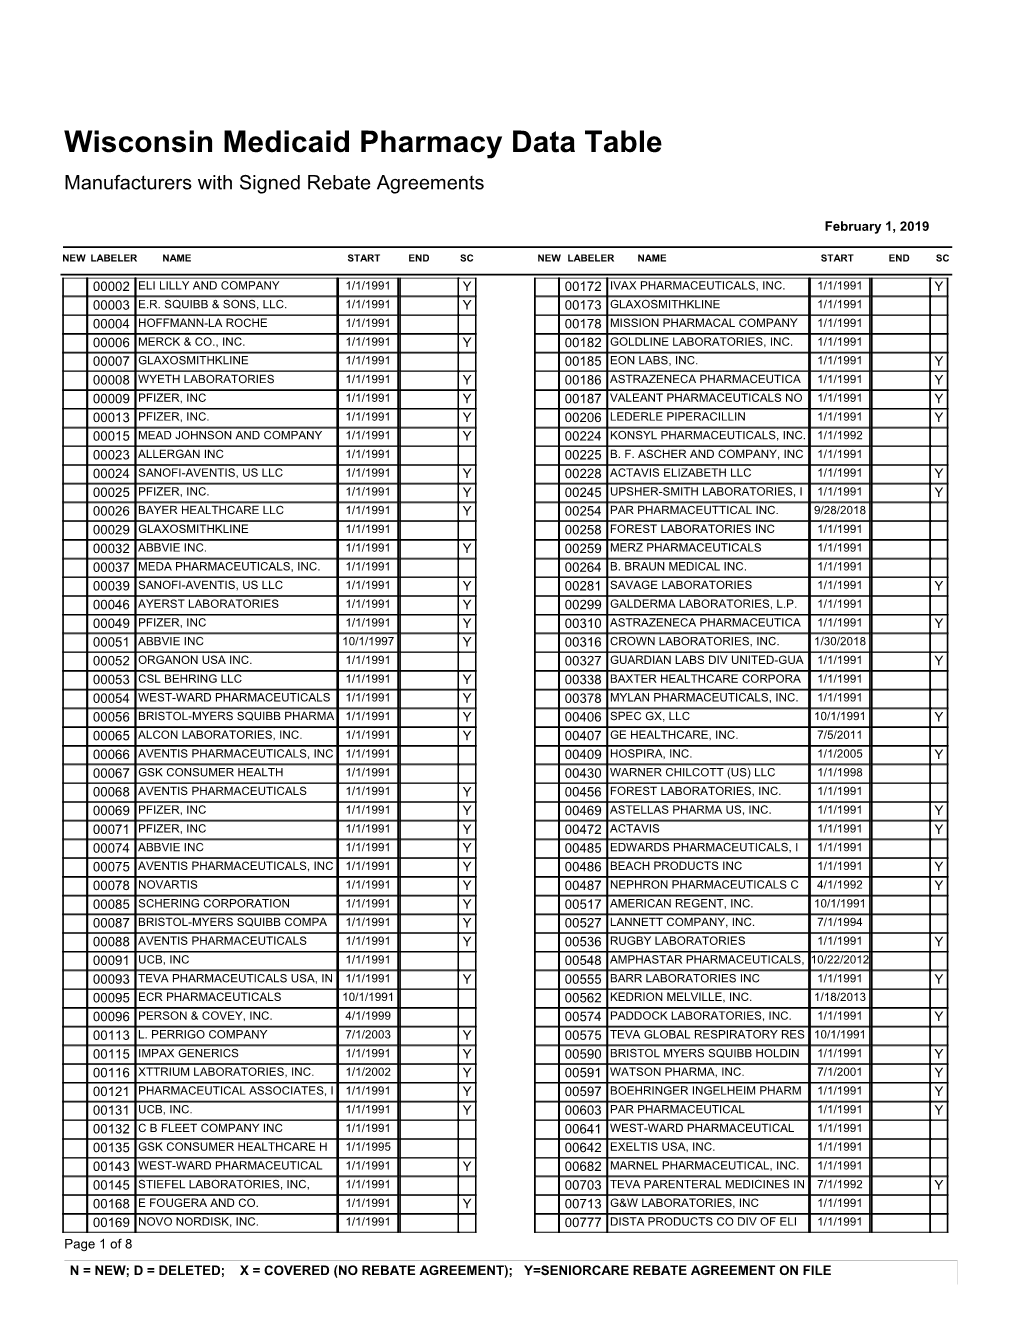 Numeric Listing of Manufacturers That Have Signed Rebate Agreements